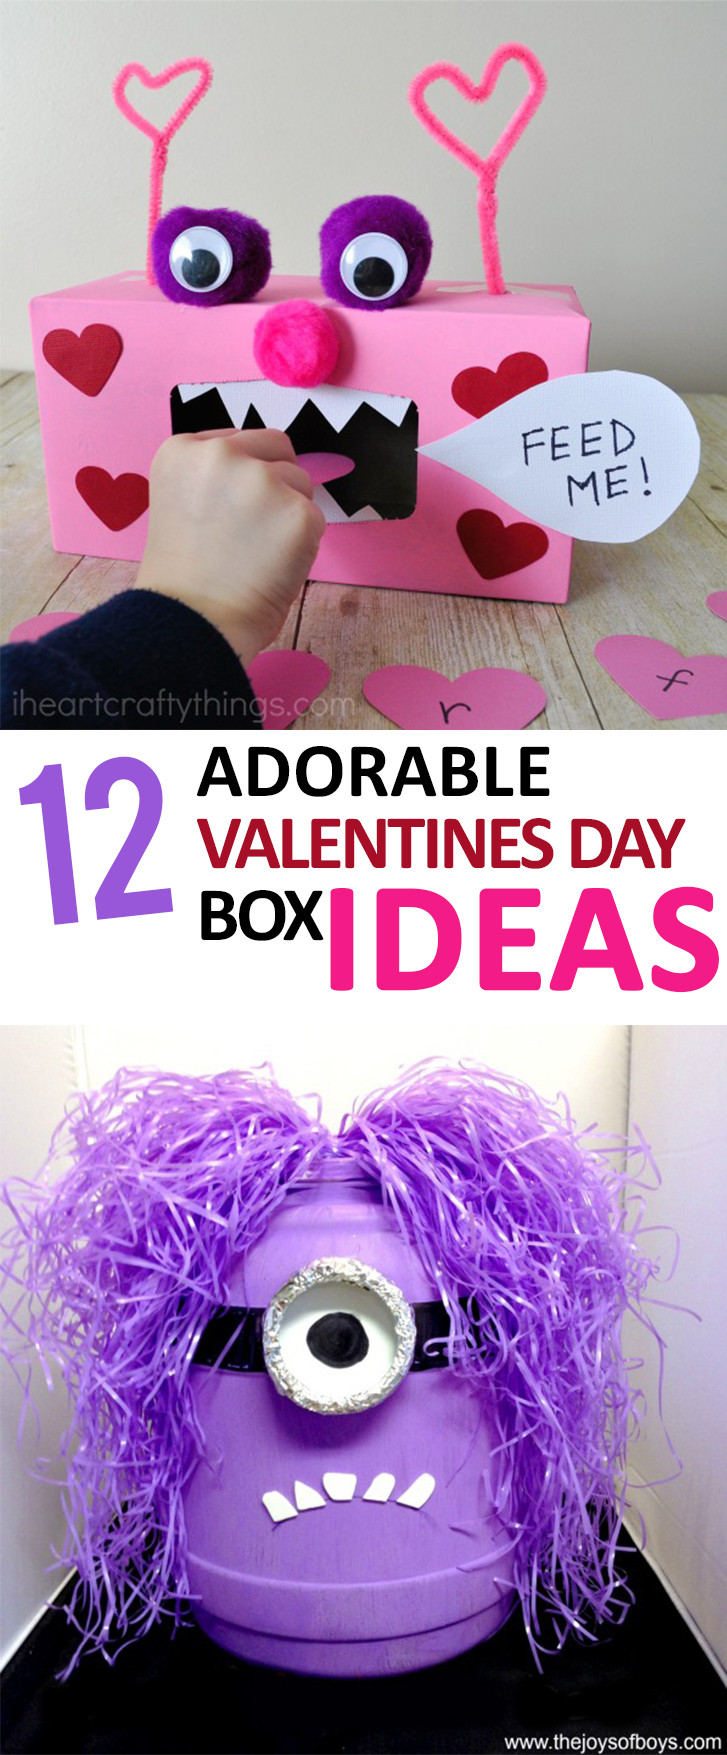 Valentine Gift Ideas For Kid
 12 Adorable Valentines Day Box Ideas – Sunlit Spaces